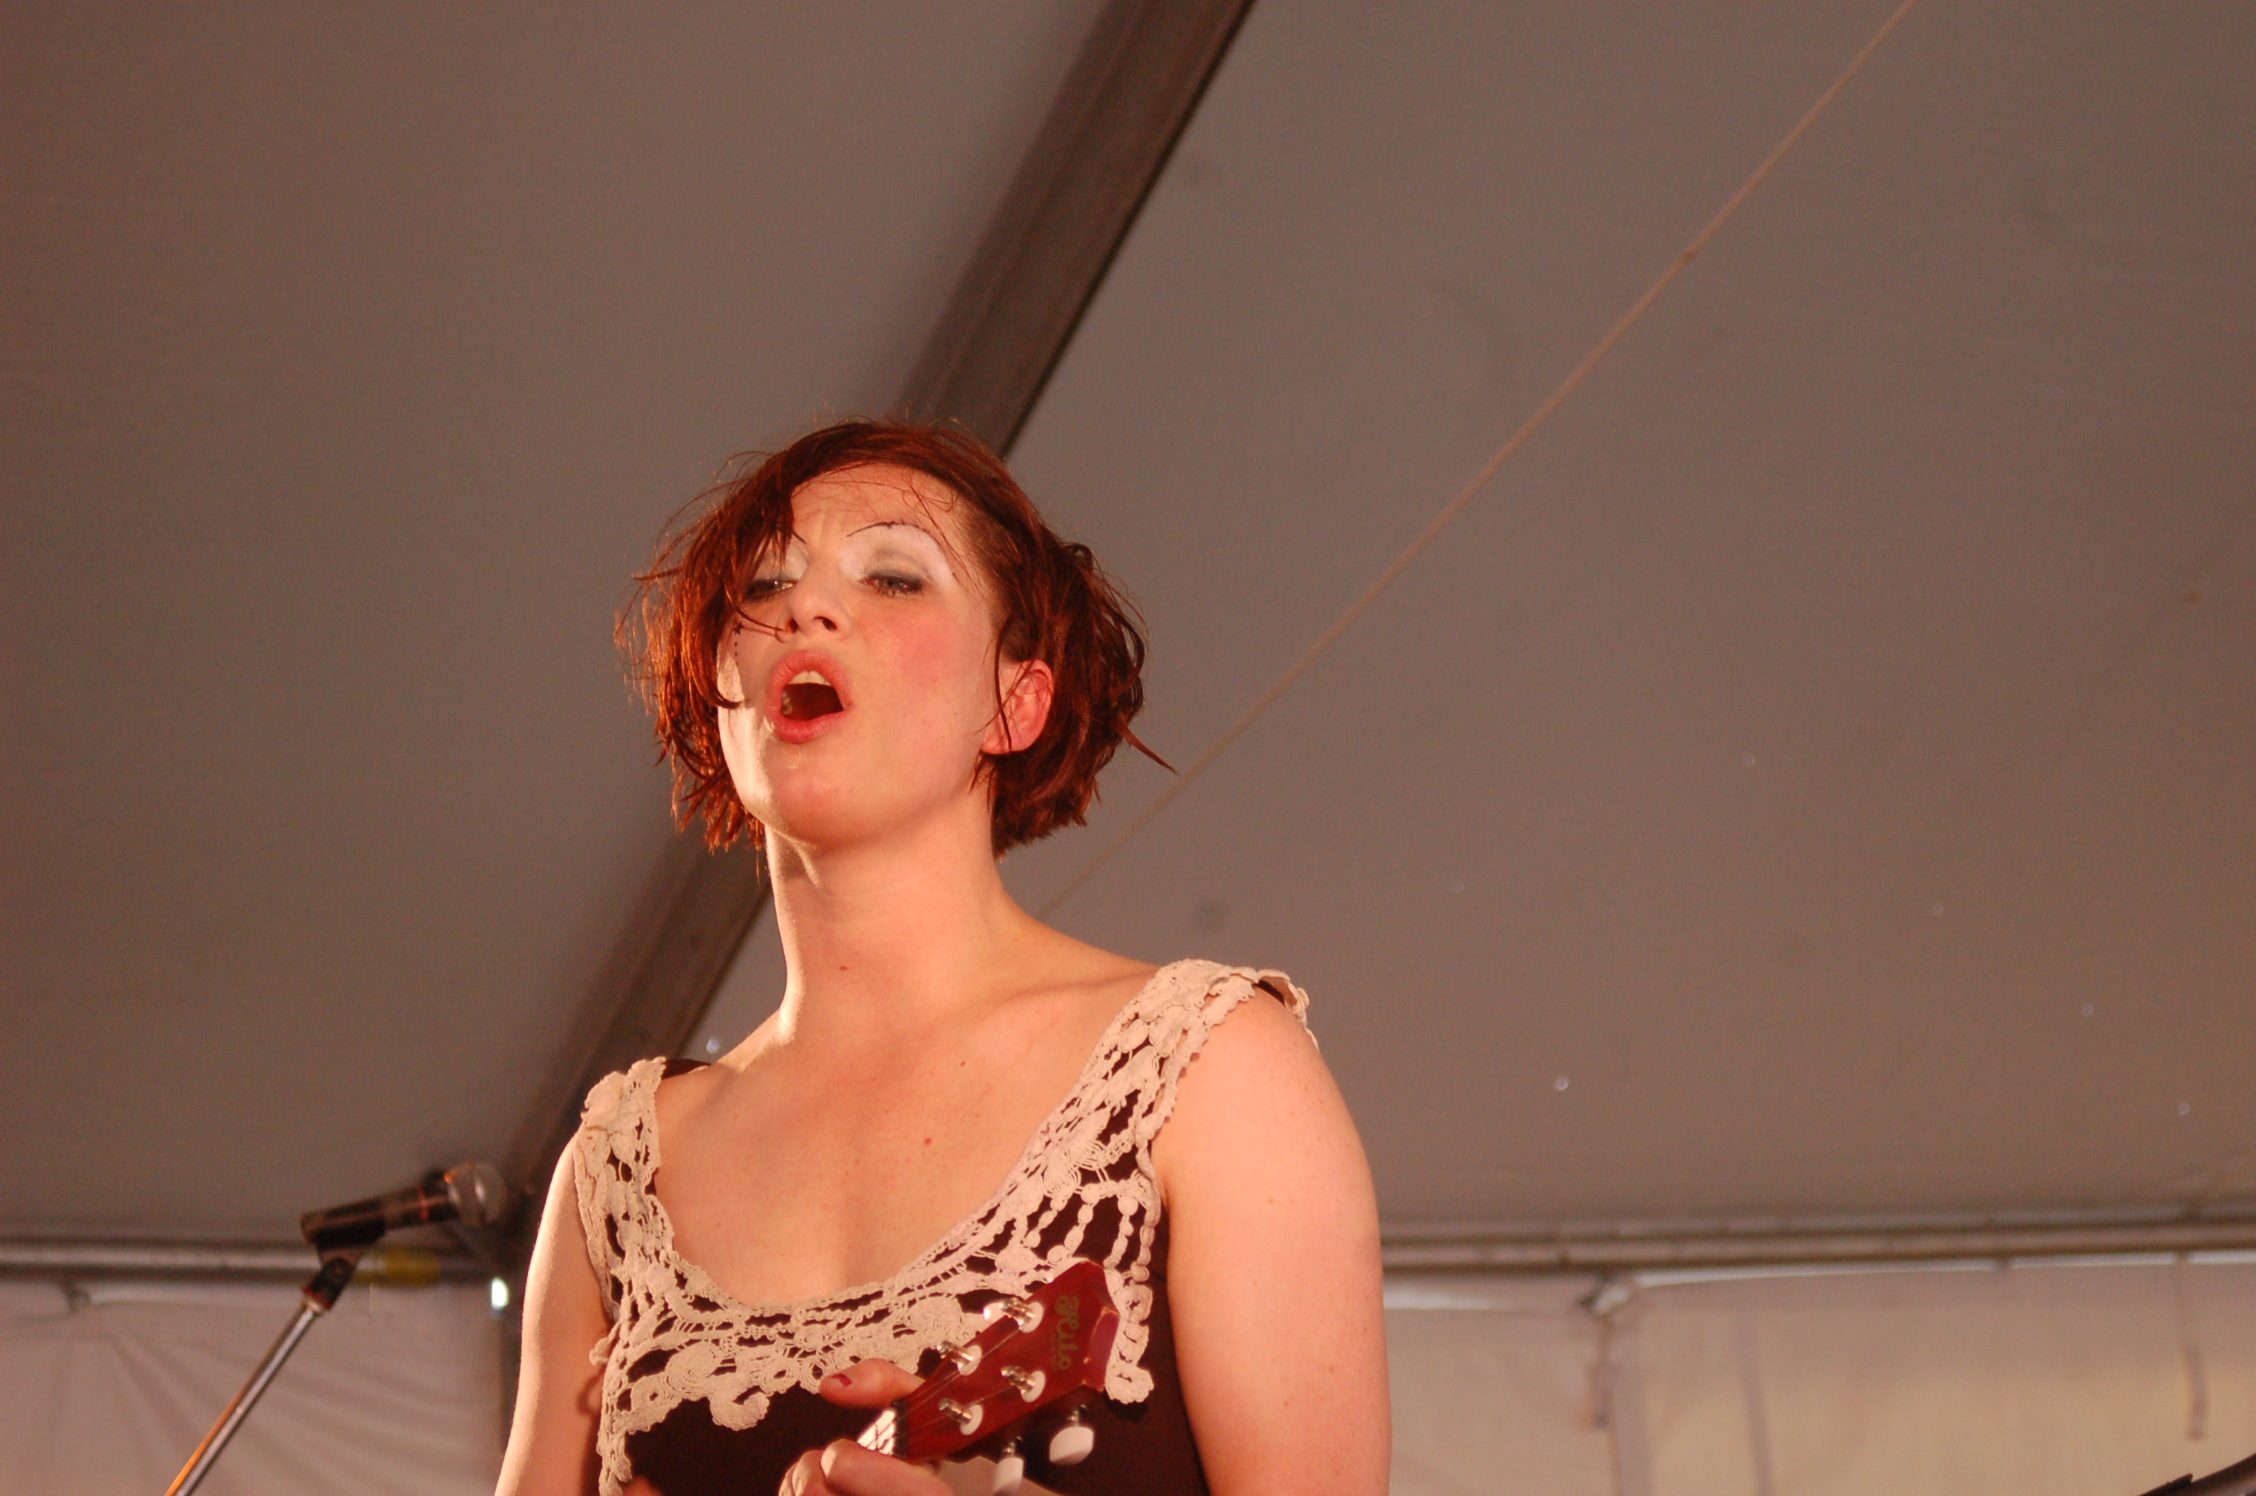 Amanda Palmer Releases Recording of New Poem "Empathy is Nothing" In Response to Her Controversial 2013 Poem "poem for dzhokhar"